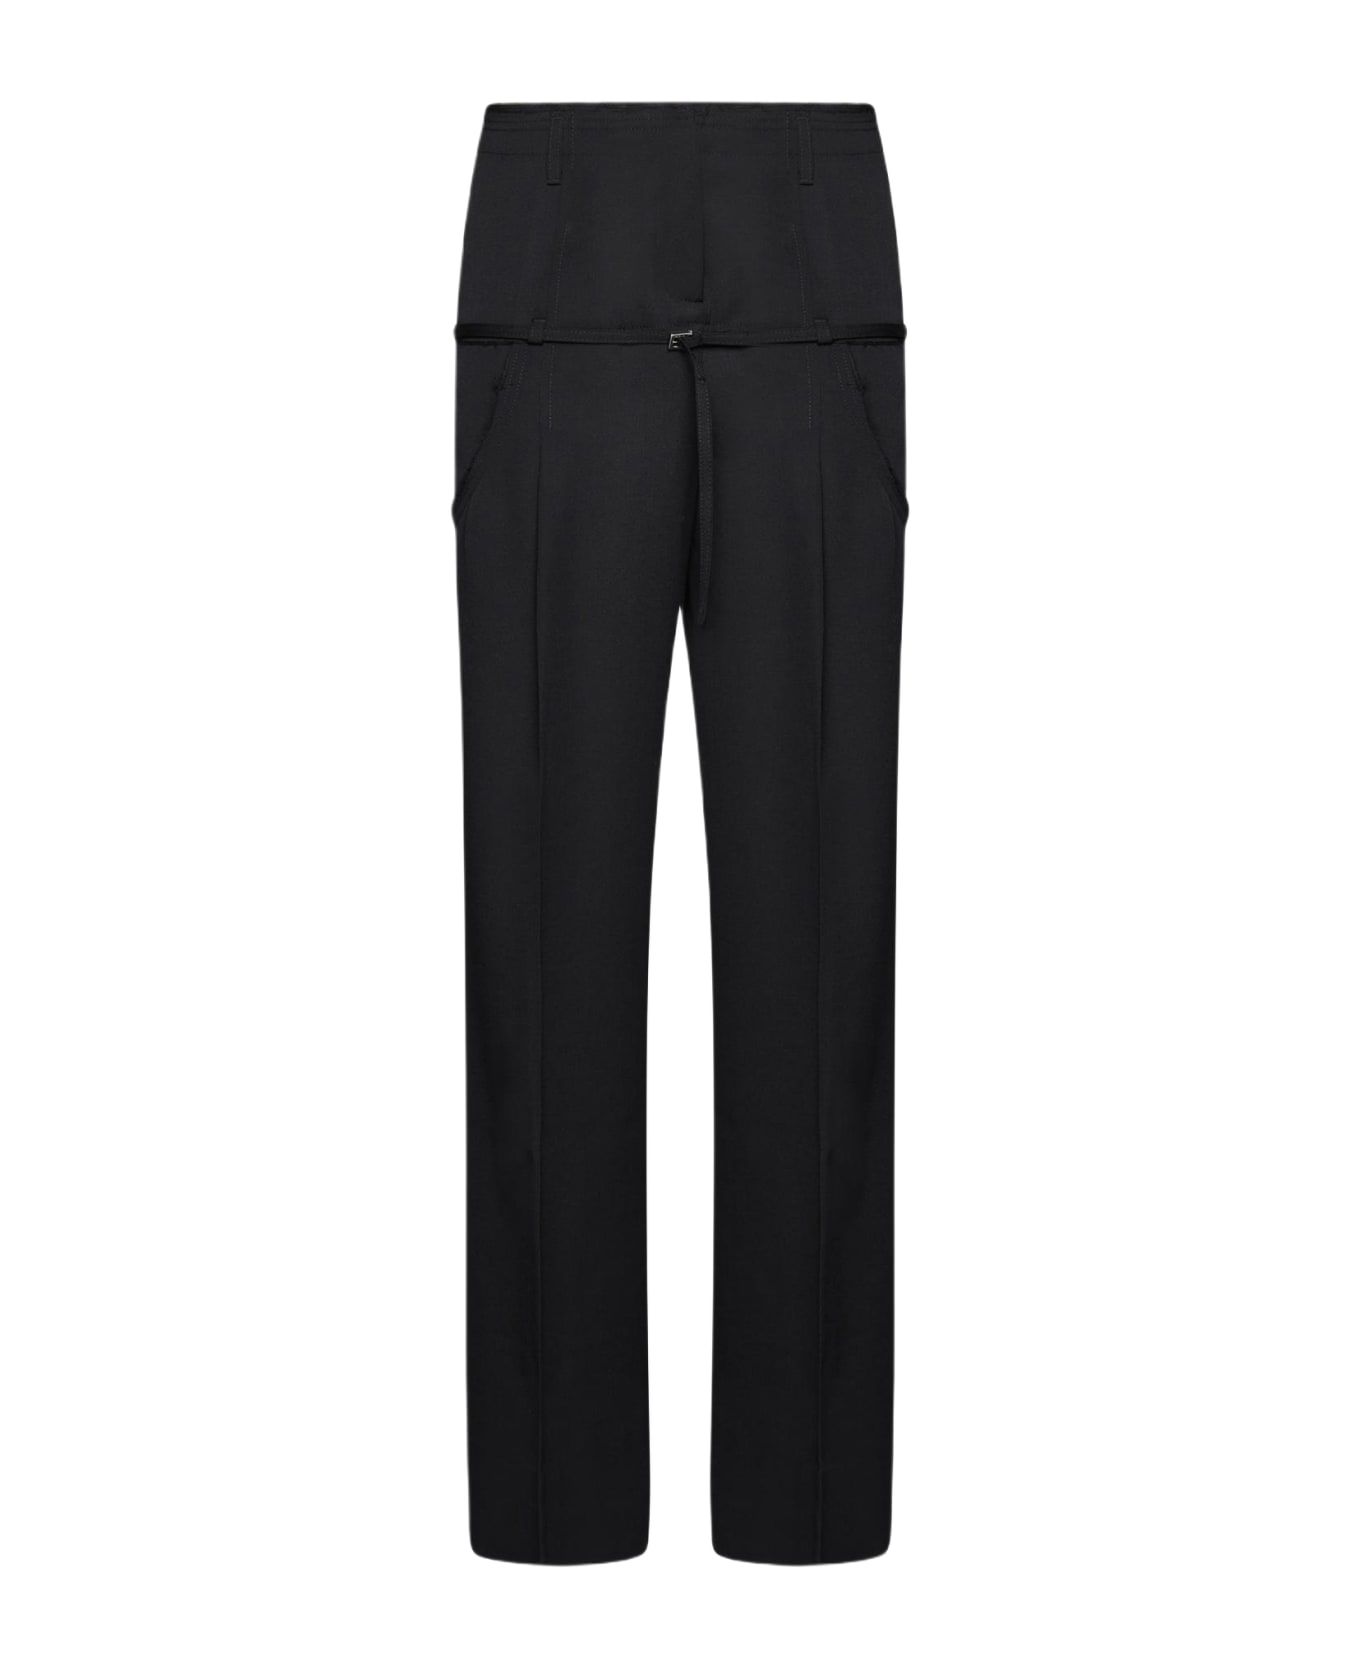 Jacquemus Criollo Wool Trousers - Black